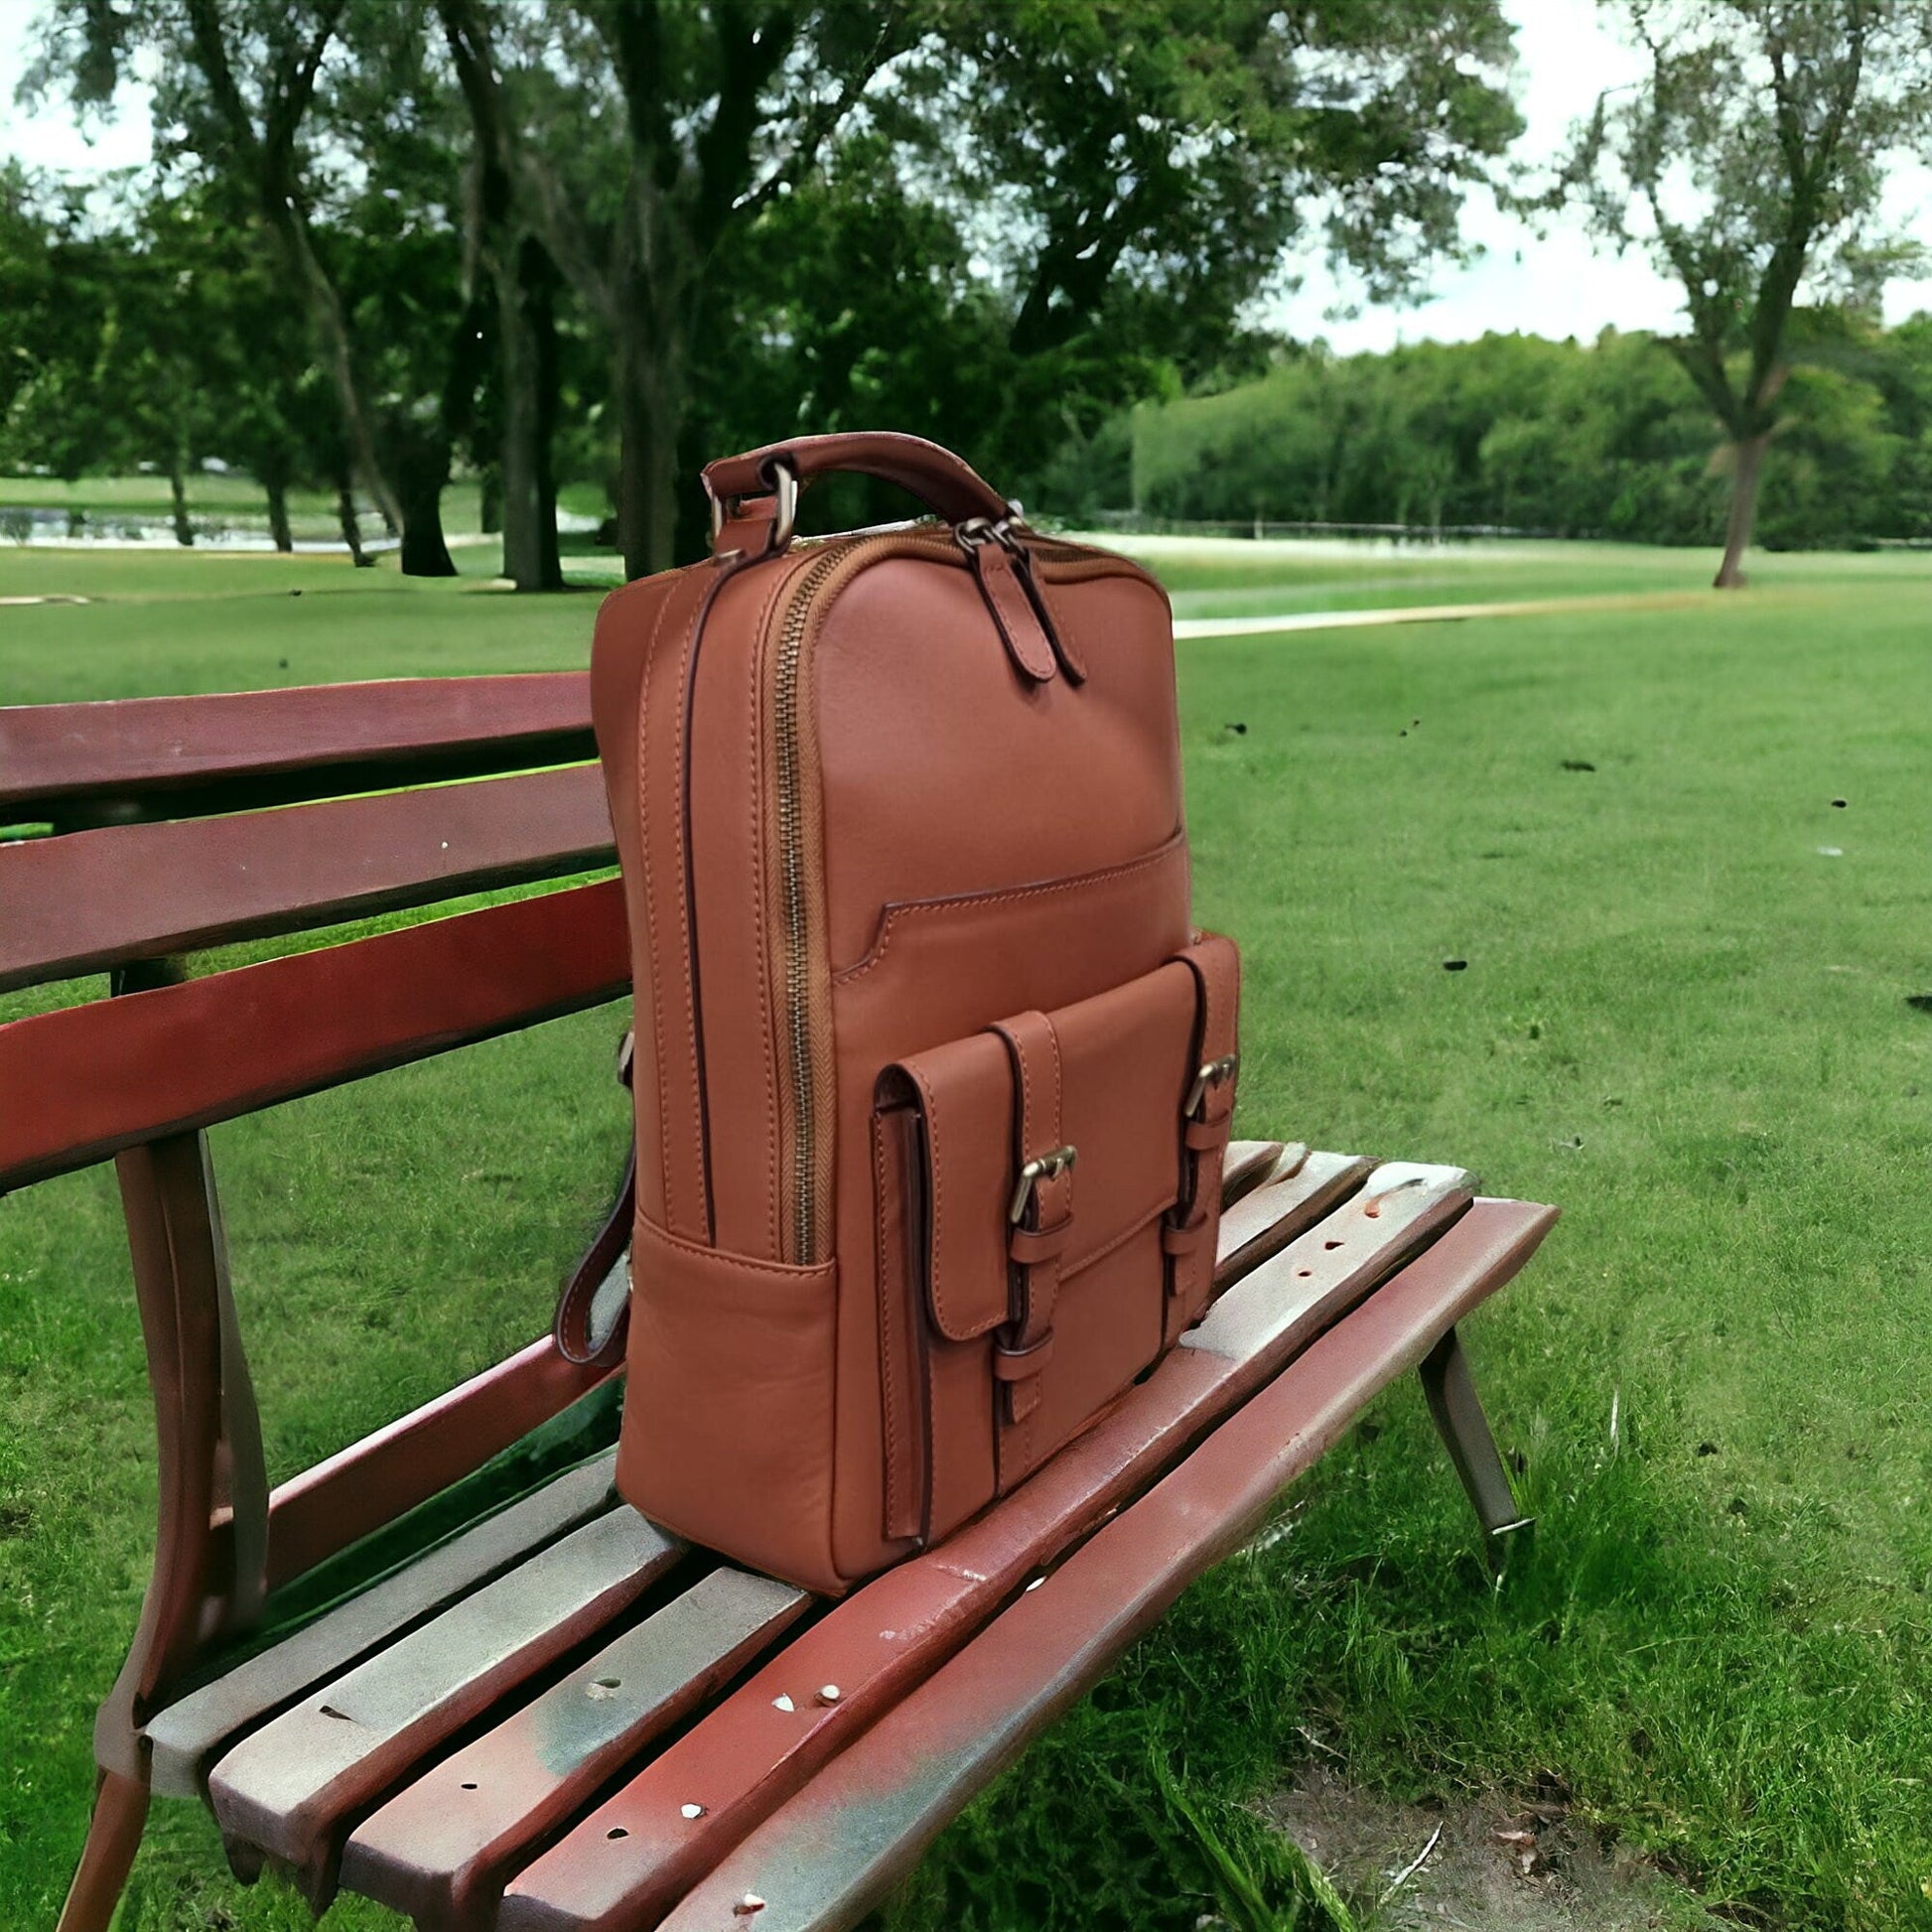 Full Leather Handmade Daypack, Brown,Tan,Black, Blue color, 20-30 Liter options. Laptop pocket premimum leather, Citypack, Daily use  99percenthandmade   